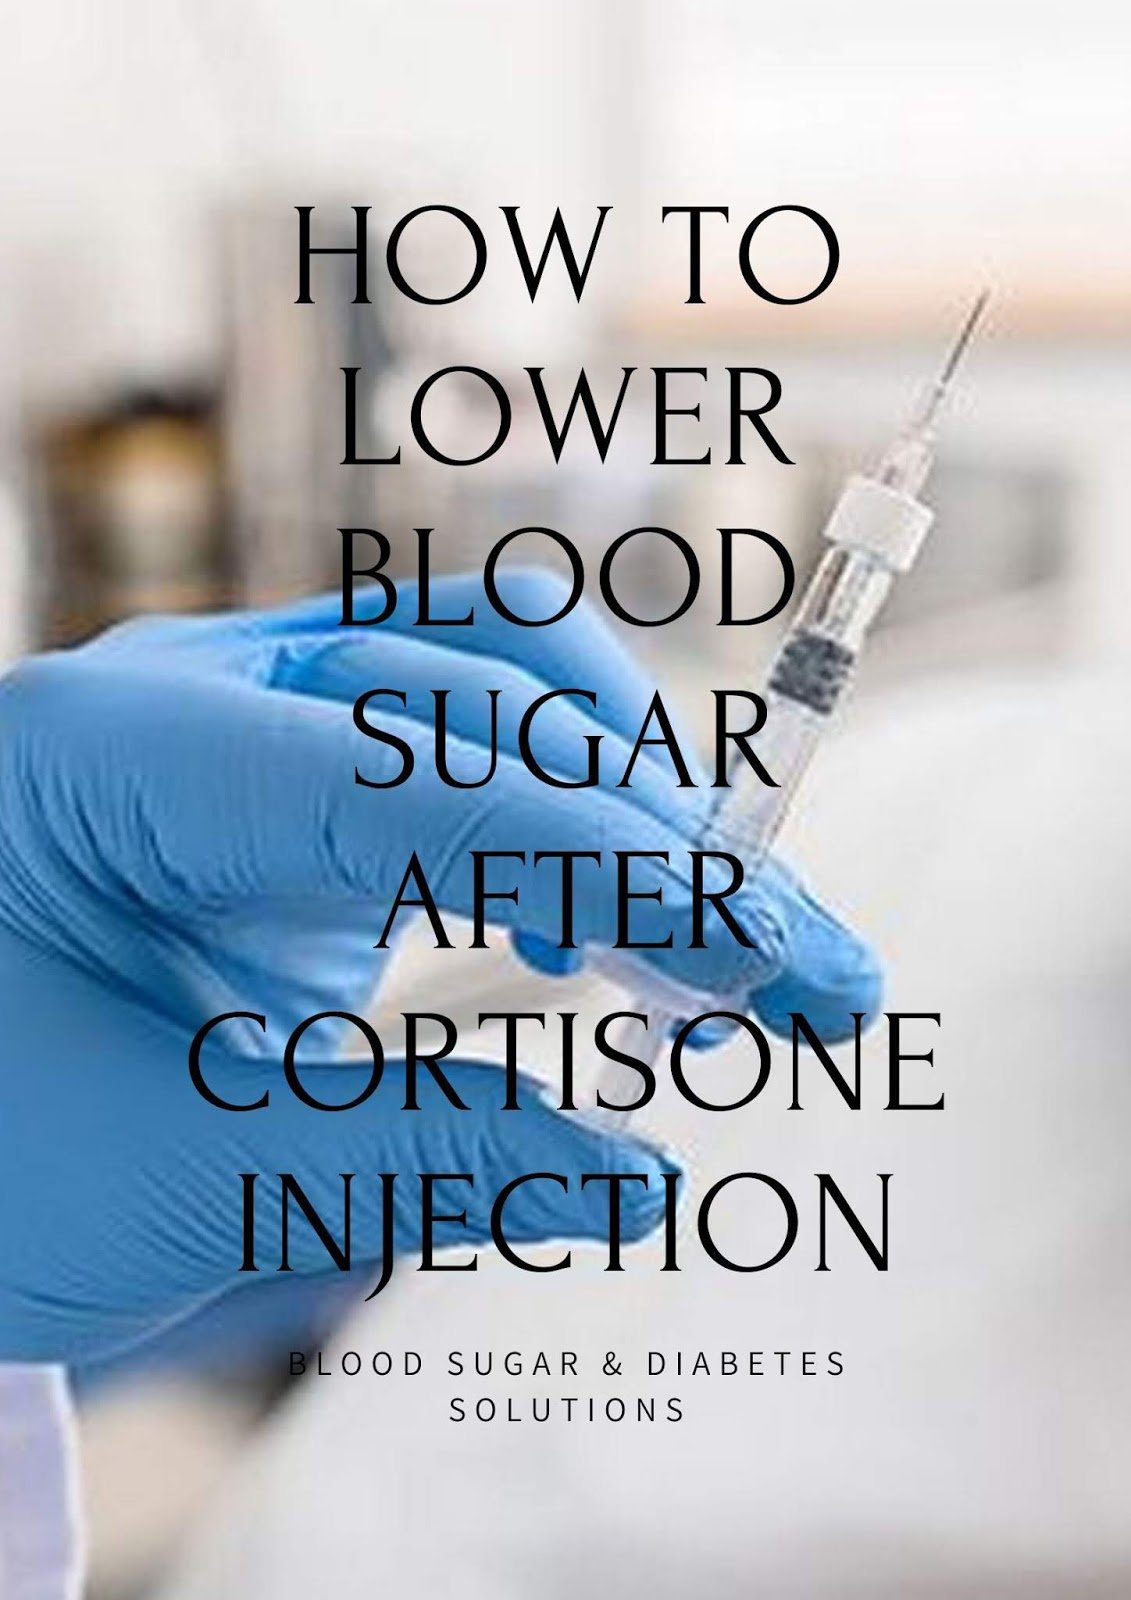 Blood Sugar Symptoms: How to lower blood sugar after cortisone injection